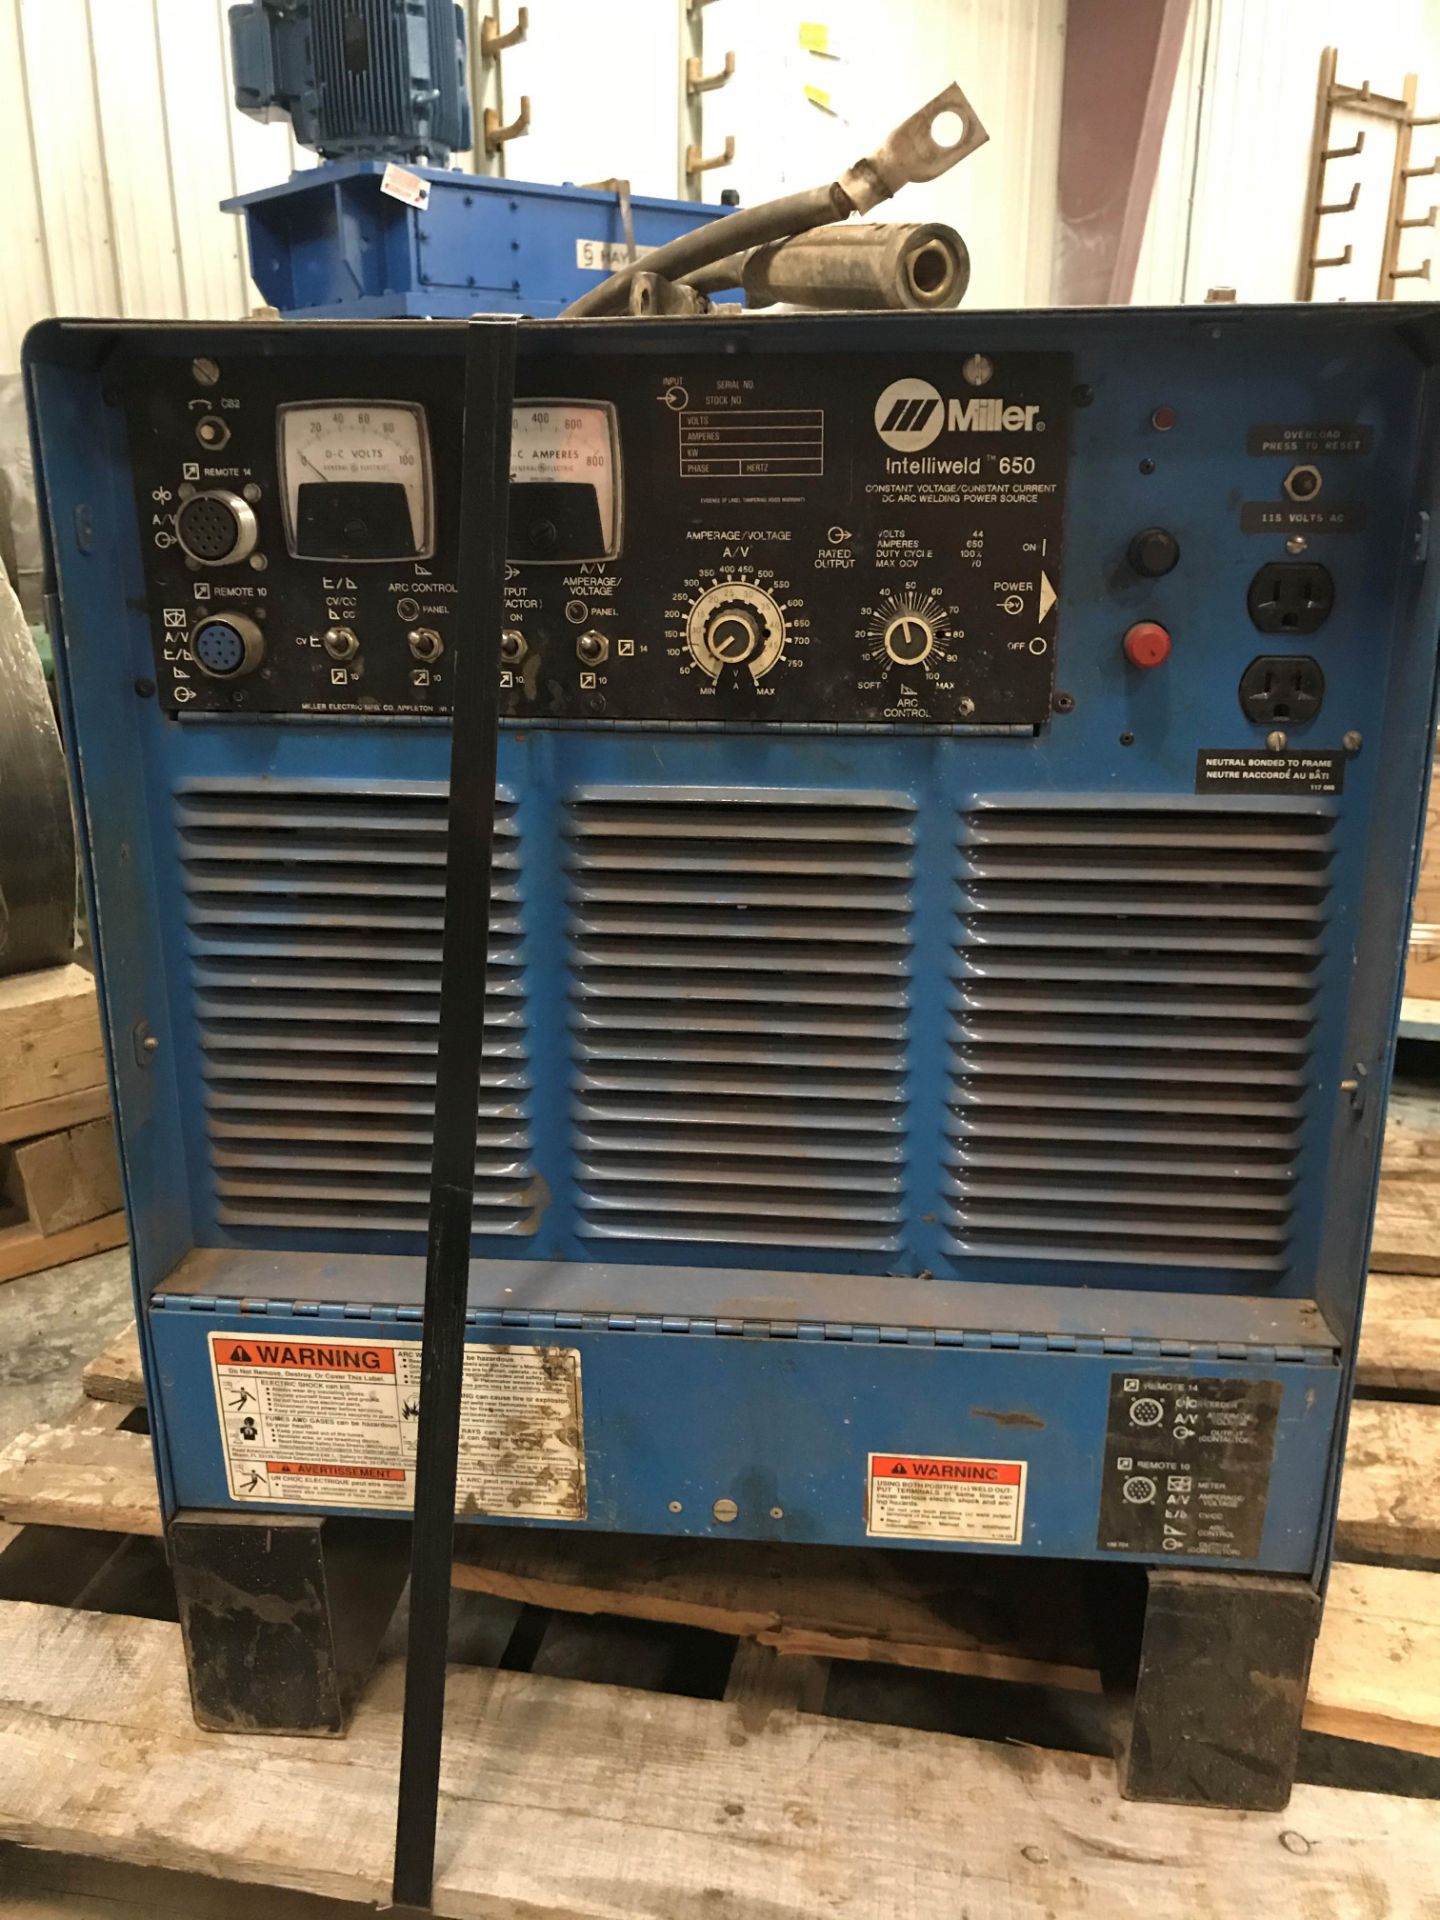 MILLER INTELLIWELD 650 WELDING POWER SOURCE, S/N: KA911044 (LOCATED AT HWY 6 1 INCO RD, THOMPSON, - Image 2 of 3